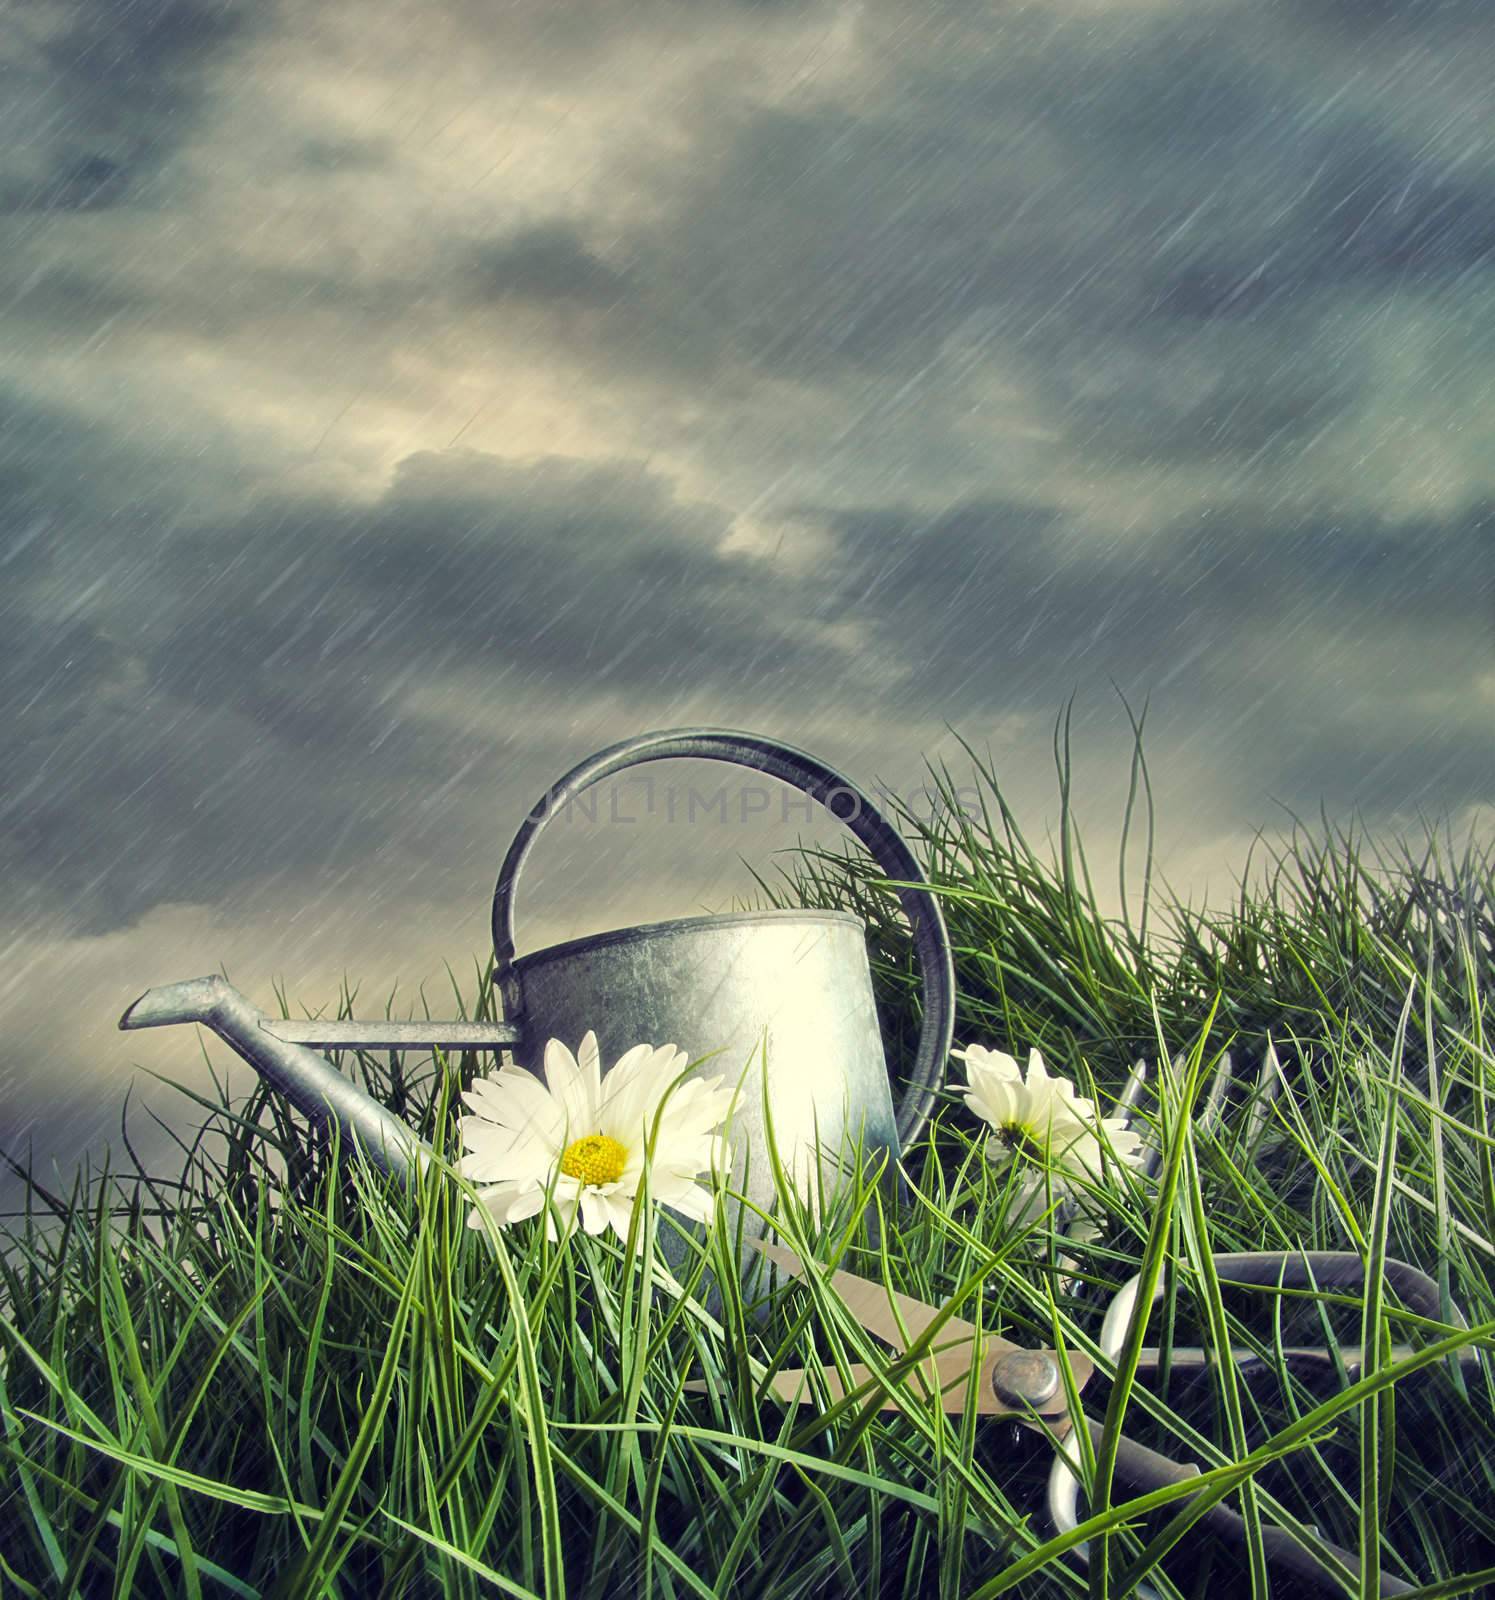 Watering can with flowers in a summer rain storm